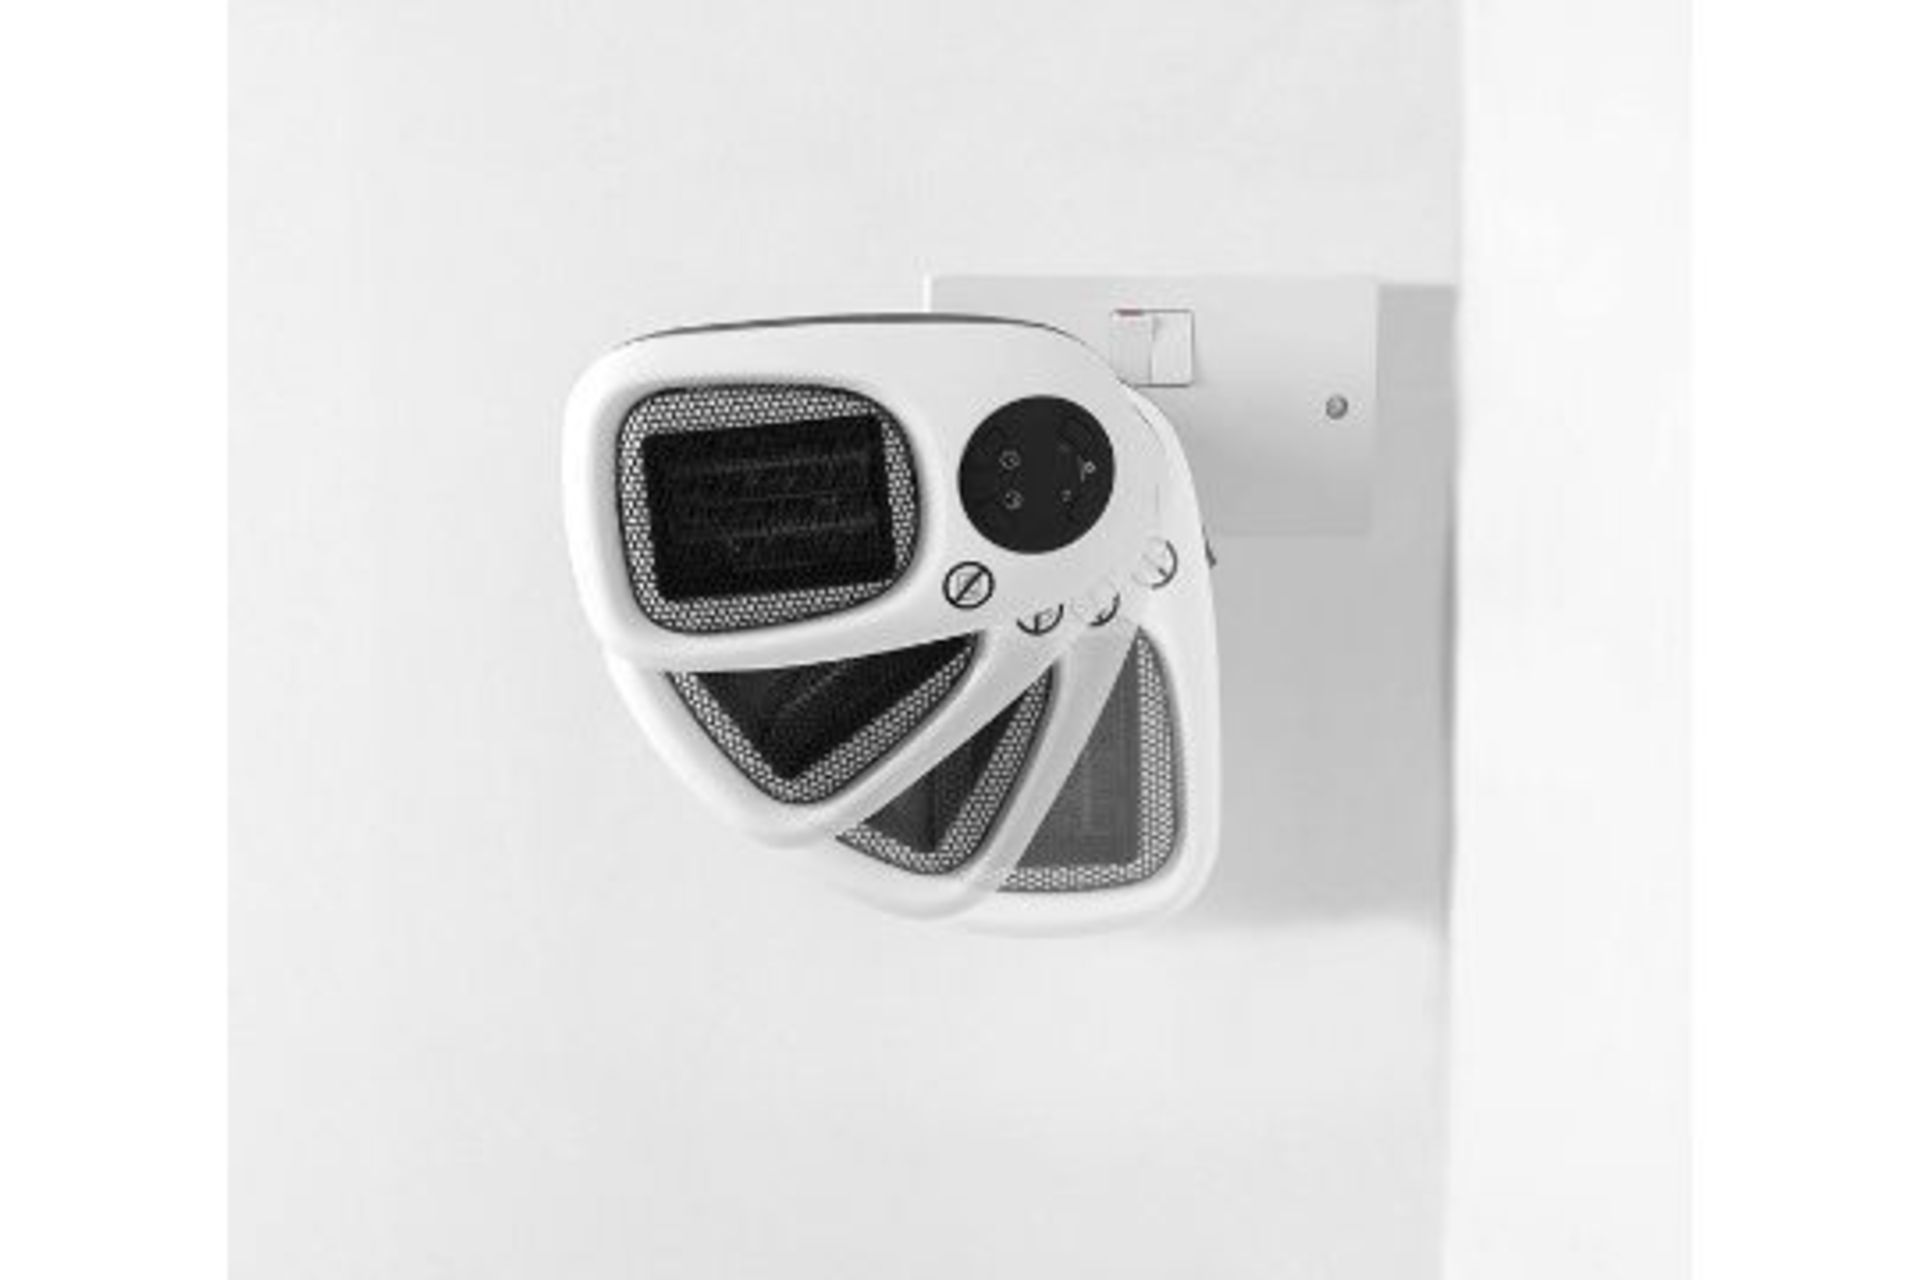 Brand New Kleeneze 500w Plug in Heater with LED Display, Timer, 90° Swivel Plug - Image 2 of 2